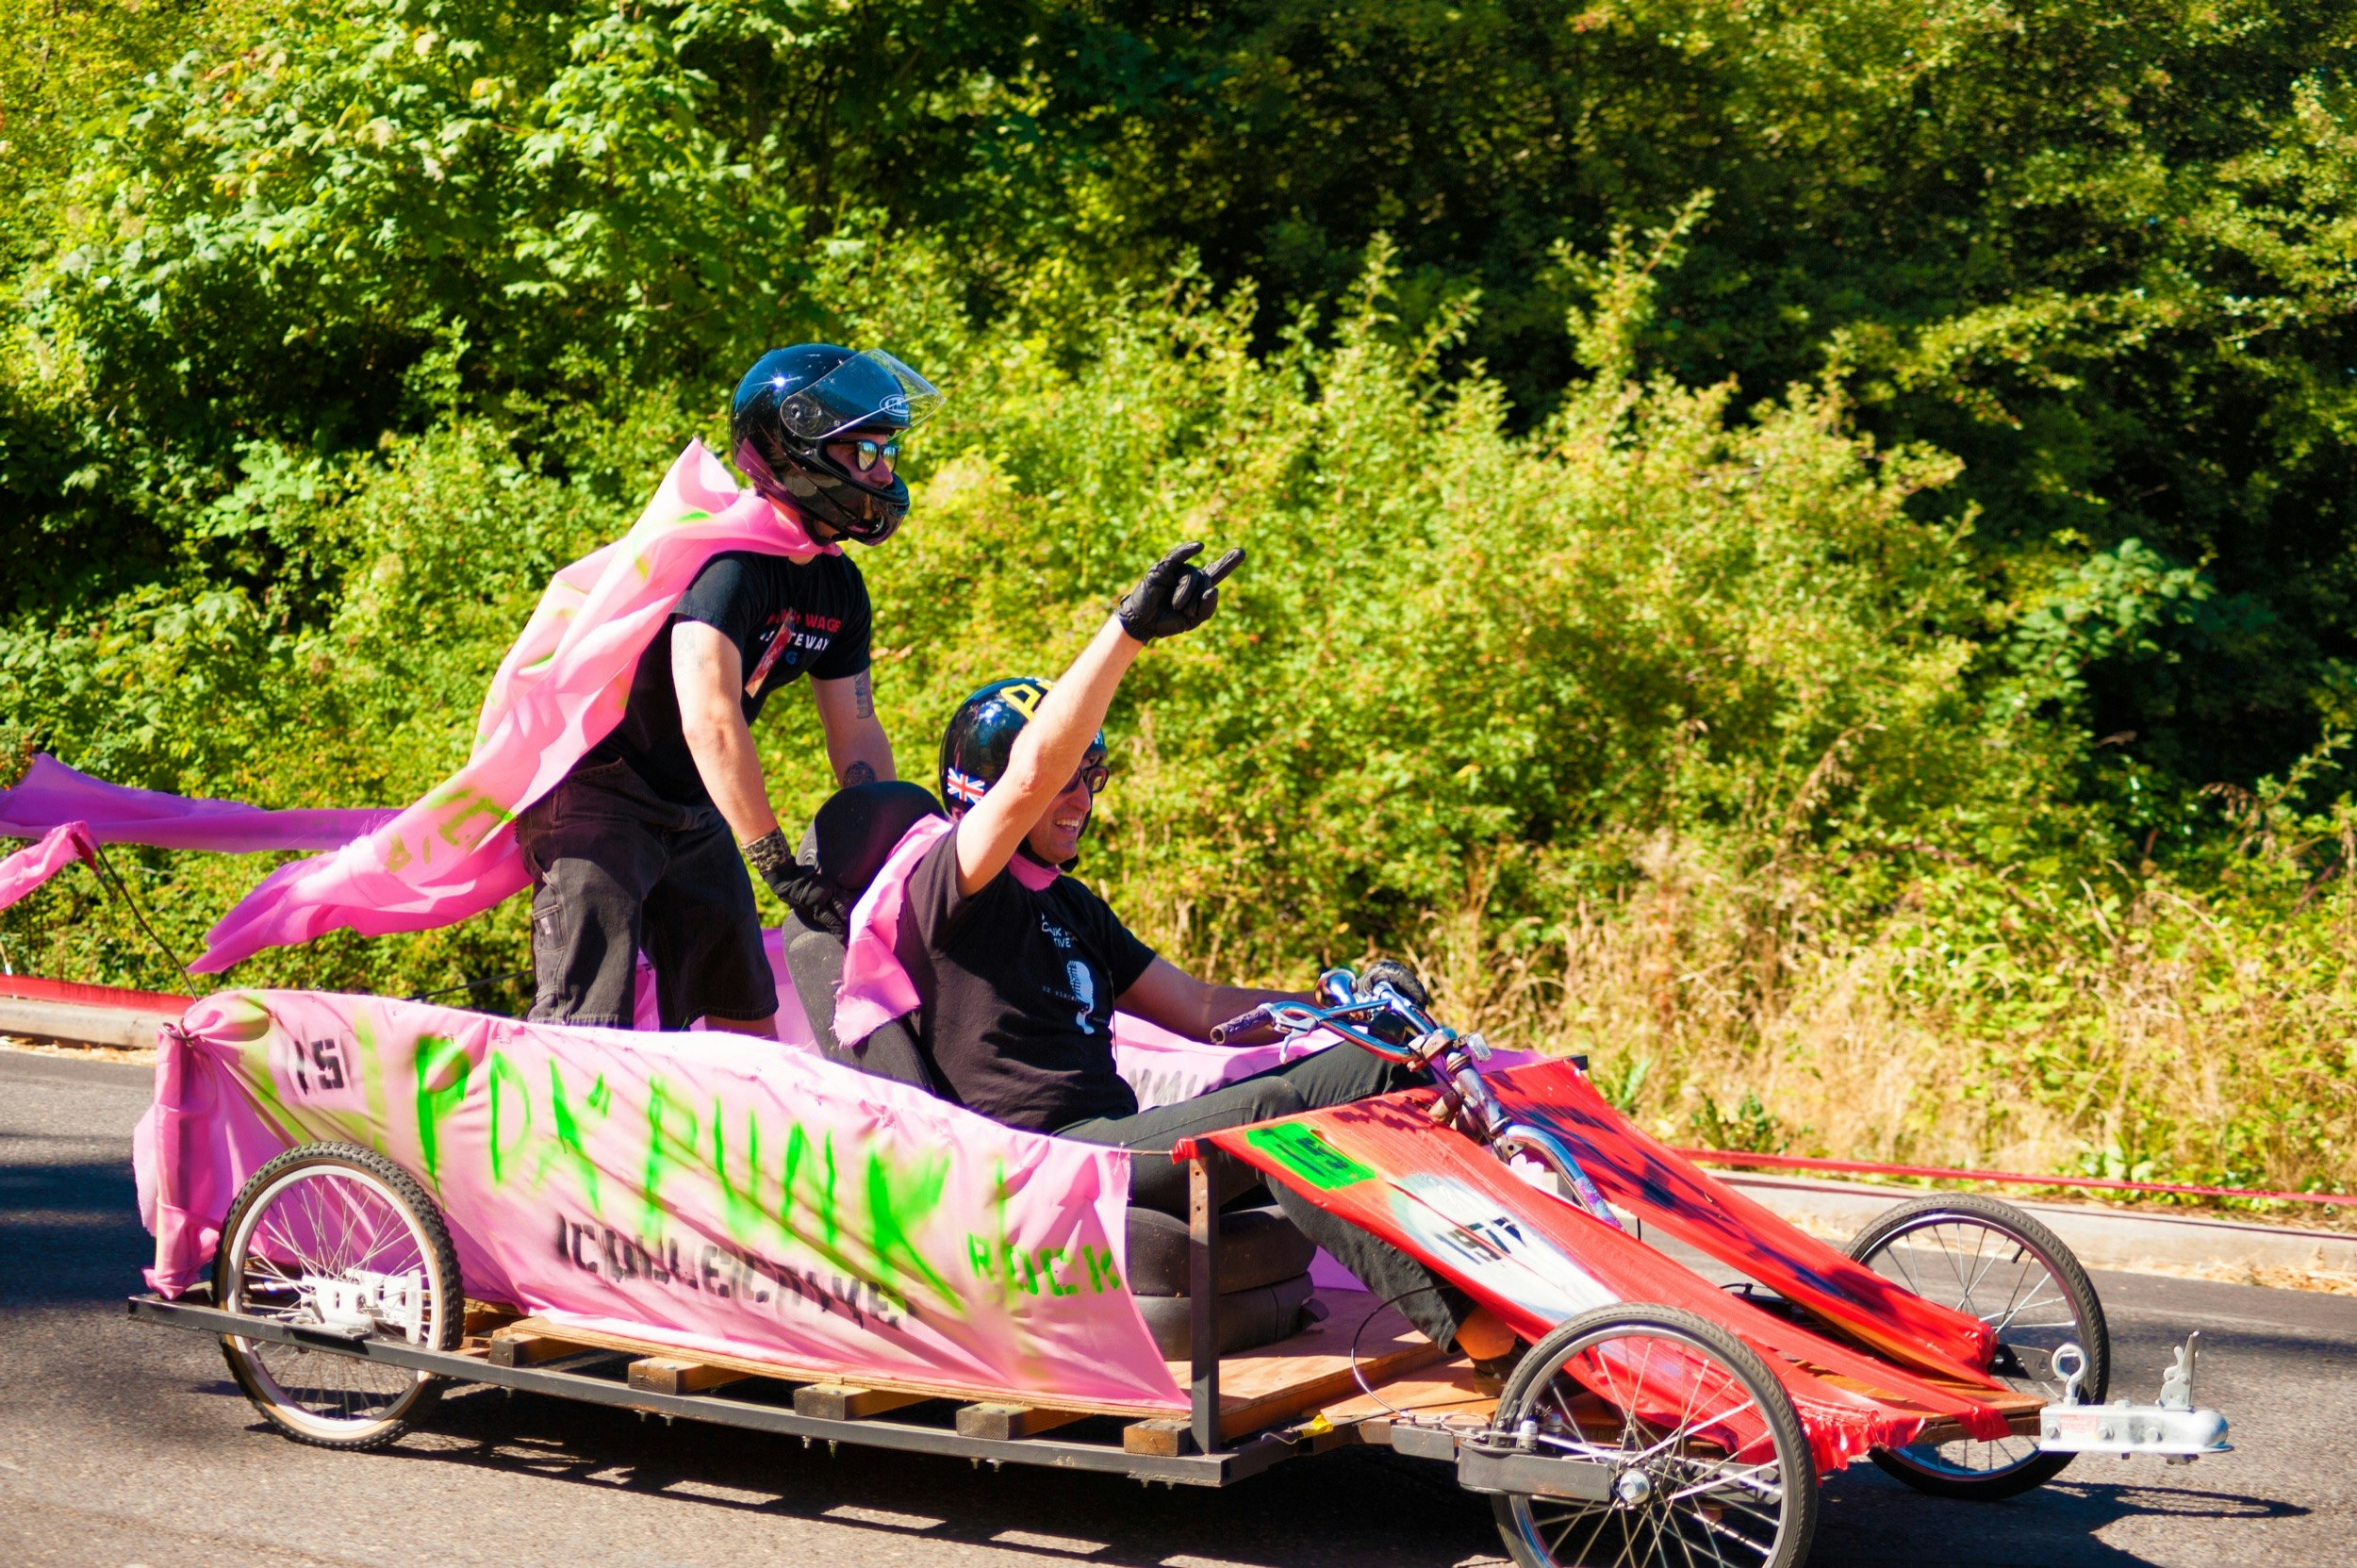 Two men celebrate in a pink soapbox derby racer during a race in Portland, Oregon; Unique sporting events